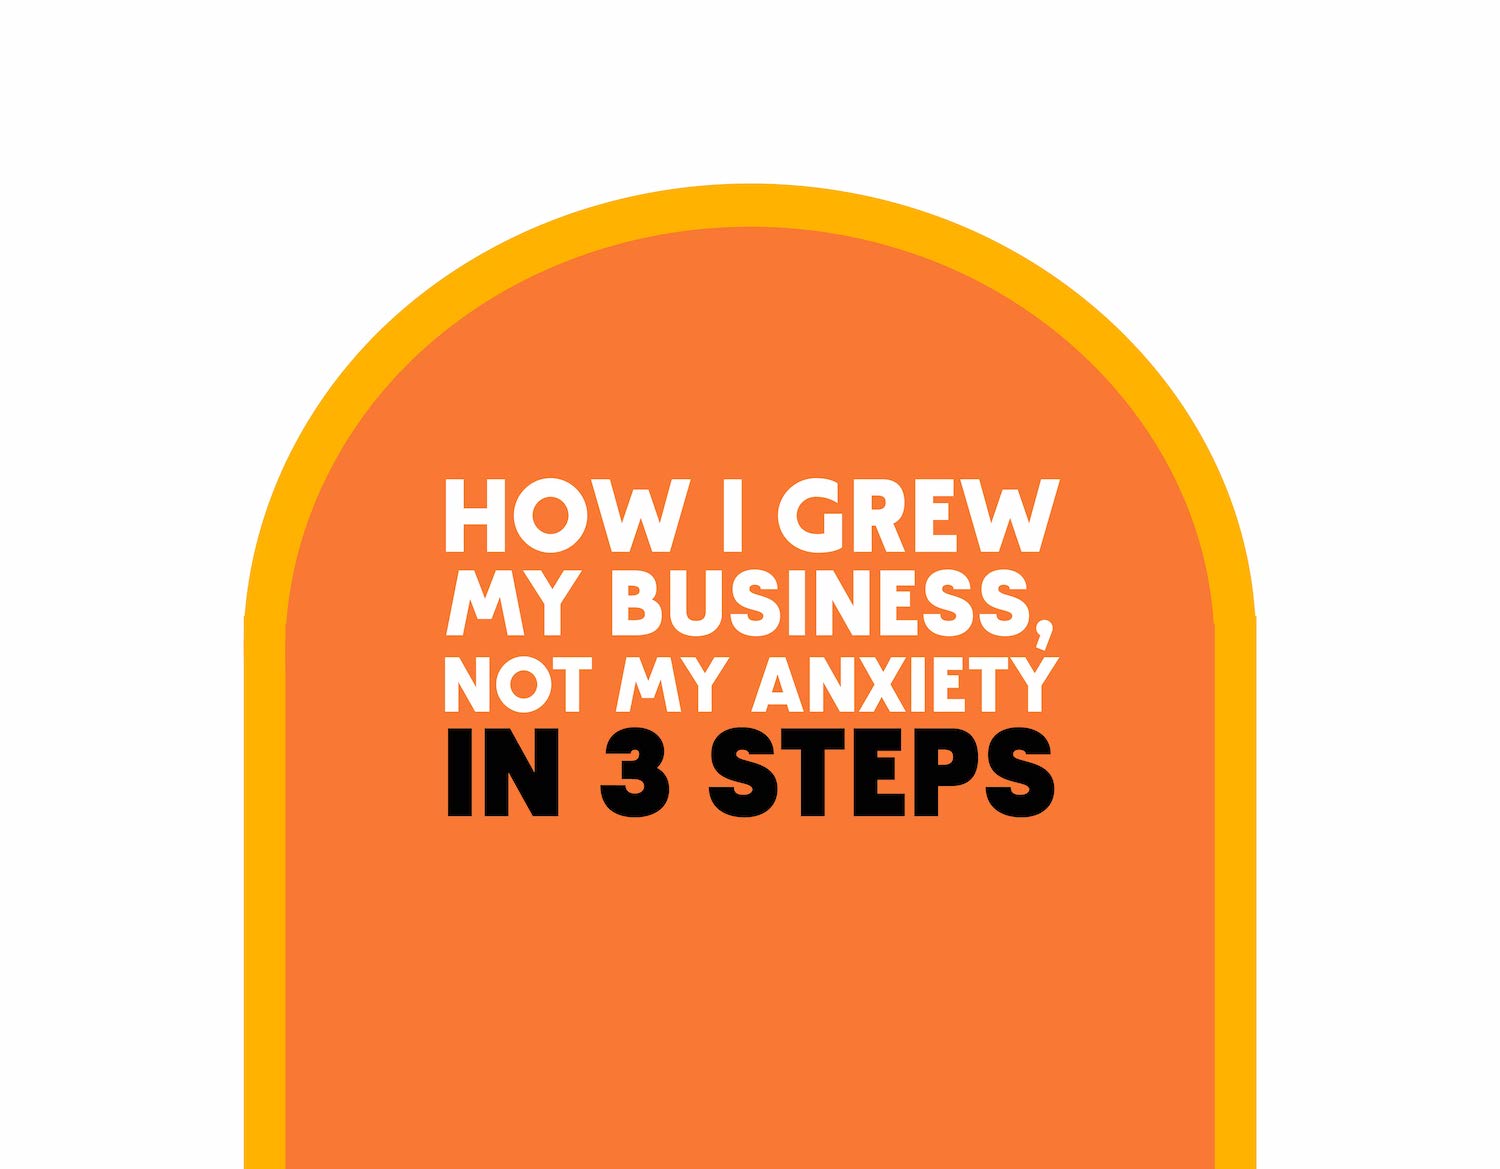 How I Grew My Business, Not My Anxiety: In 3 Steps